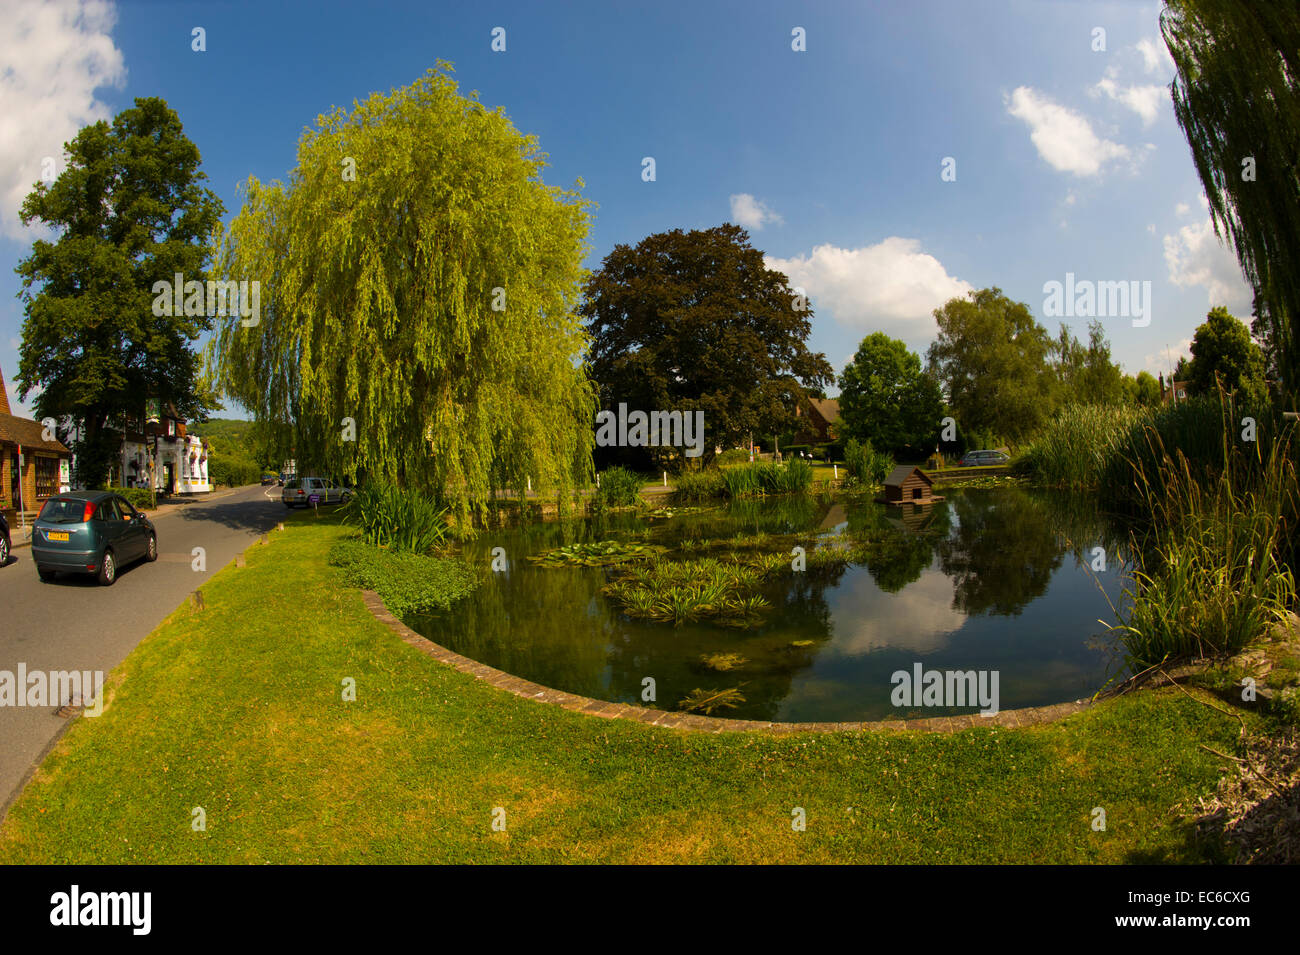 The Duck pond on the traffic roundabout, Otford Kent. Stock Photo